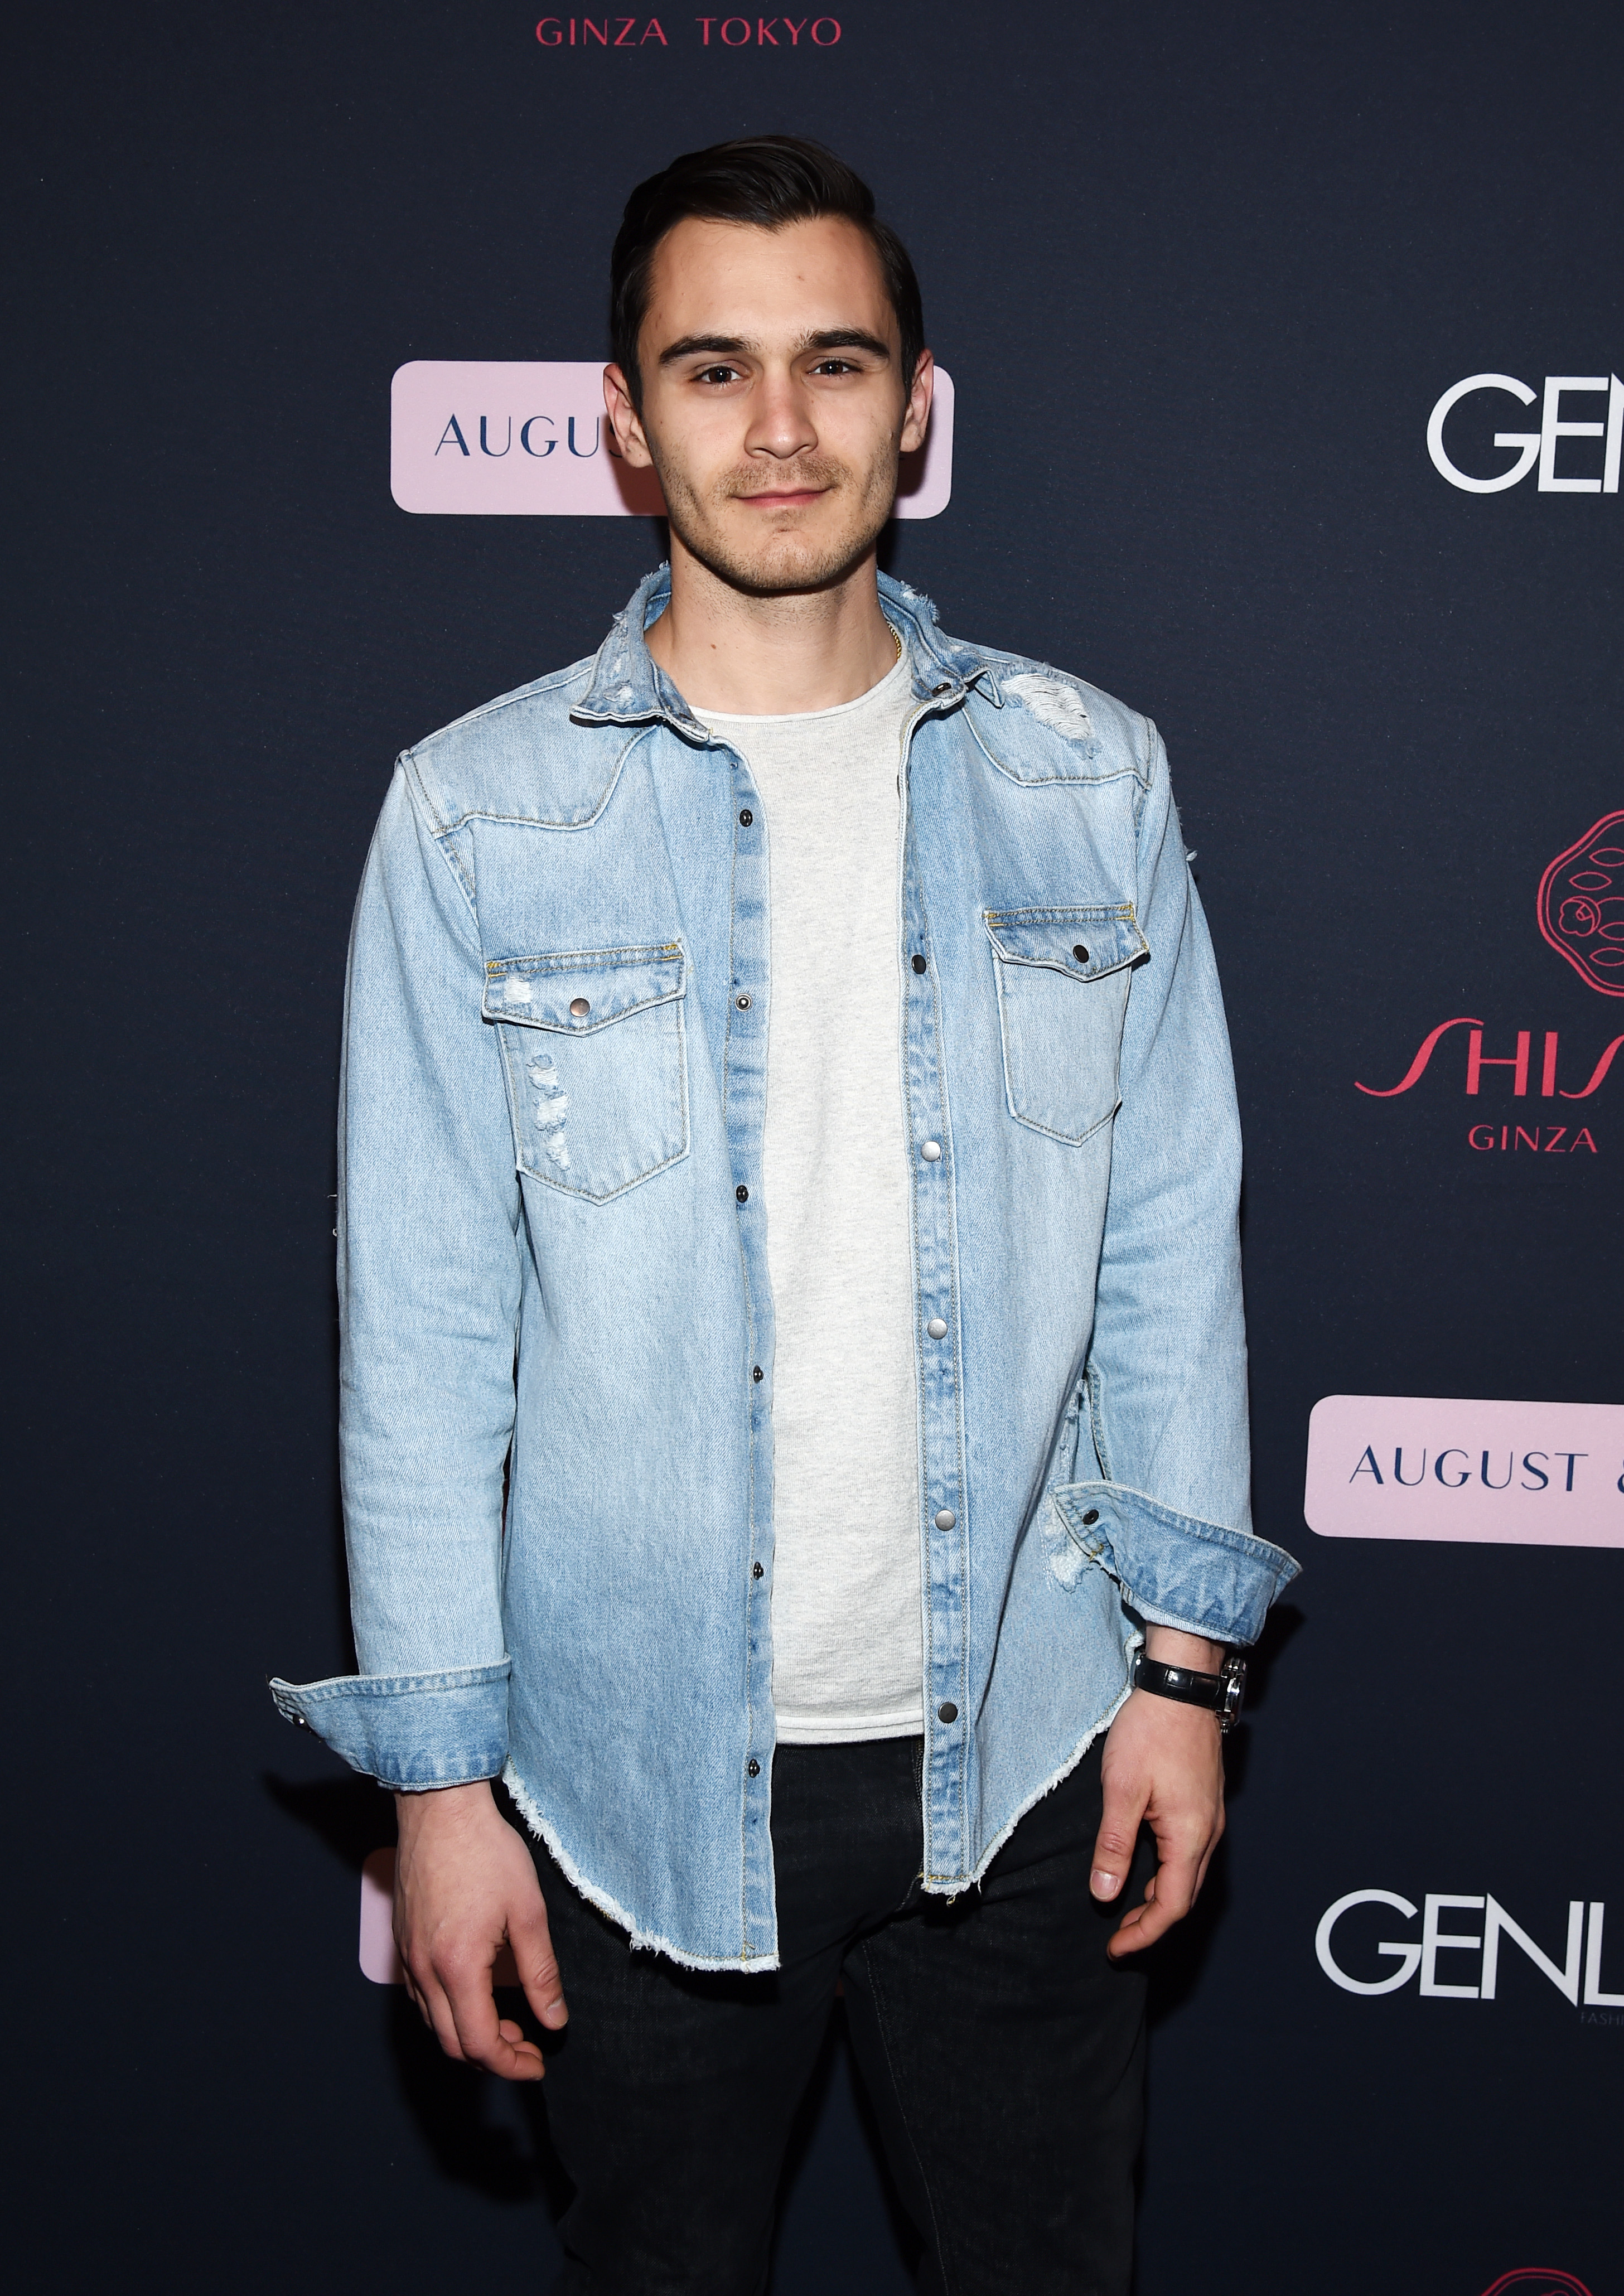 Man in a denim jacket over a shirt, standing on a branded backdrop